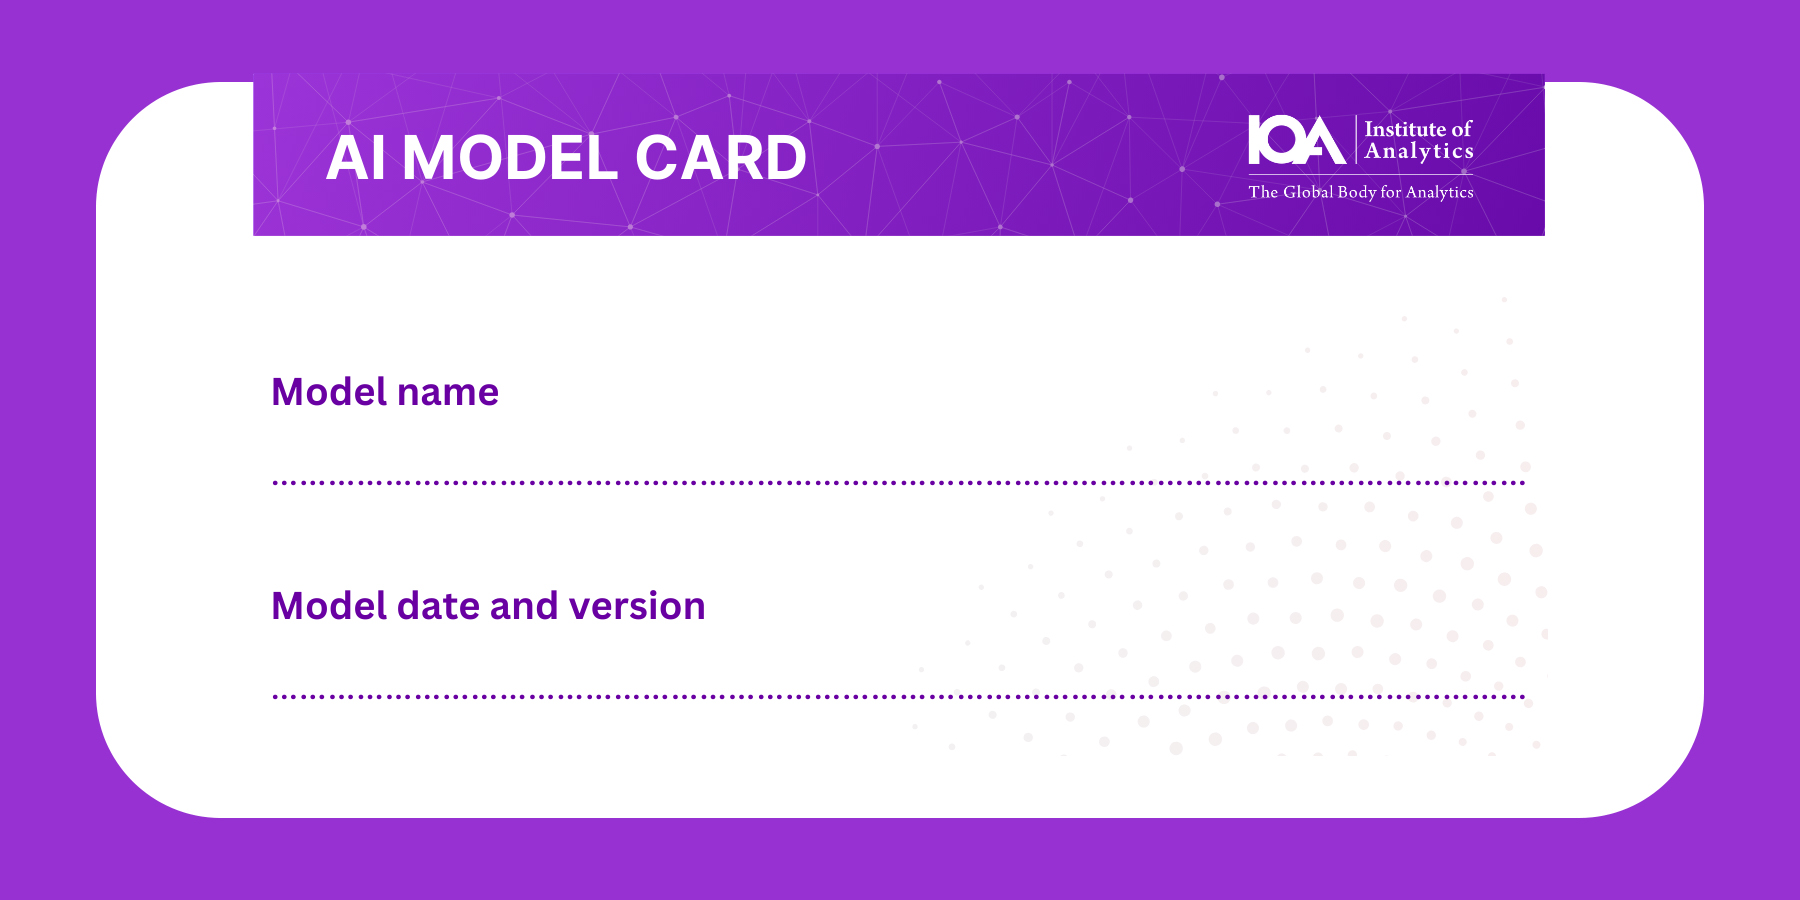 Model Cards to Support Responsible AI